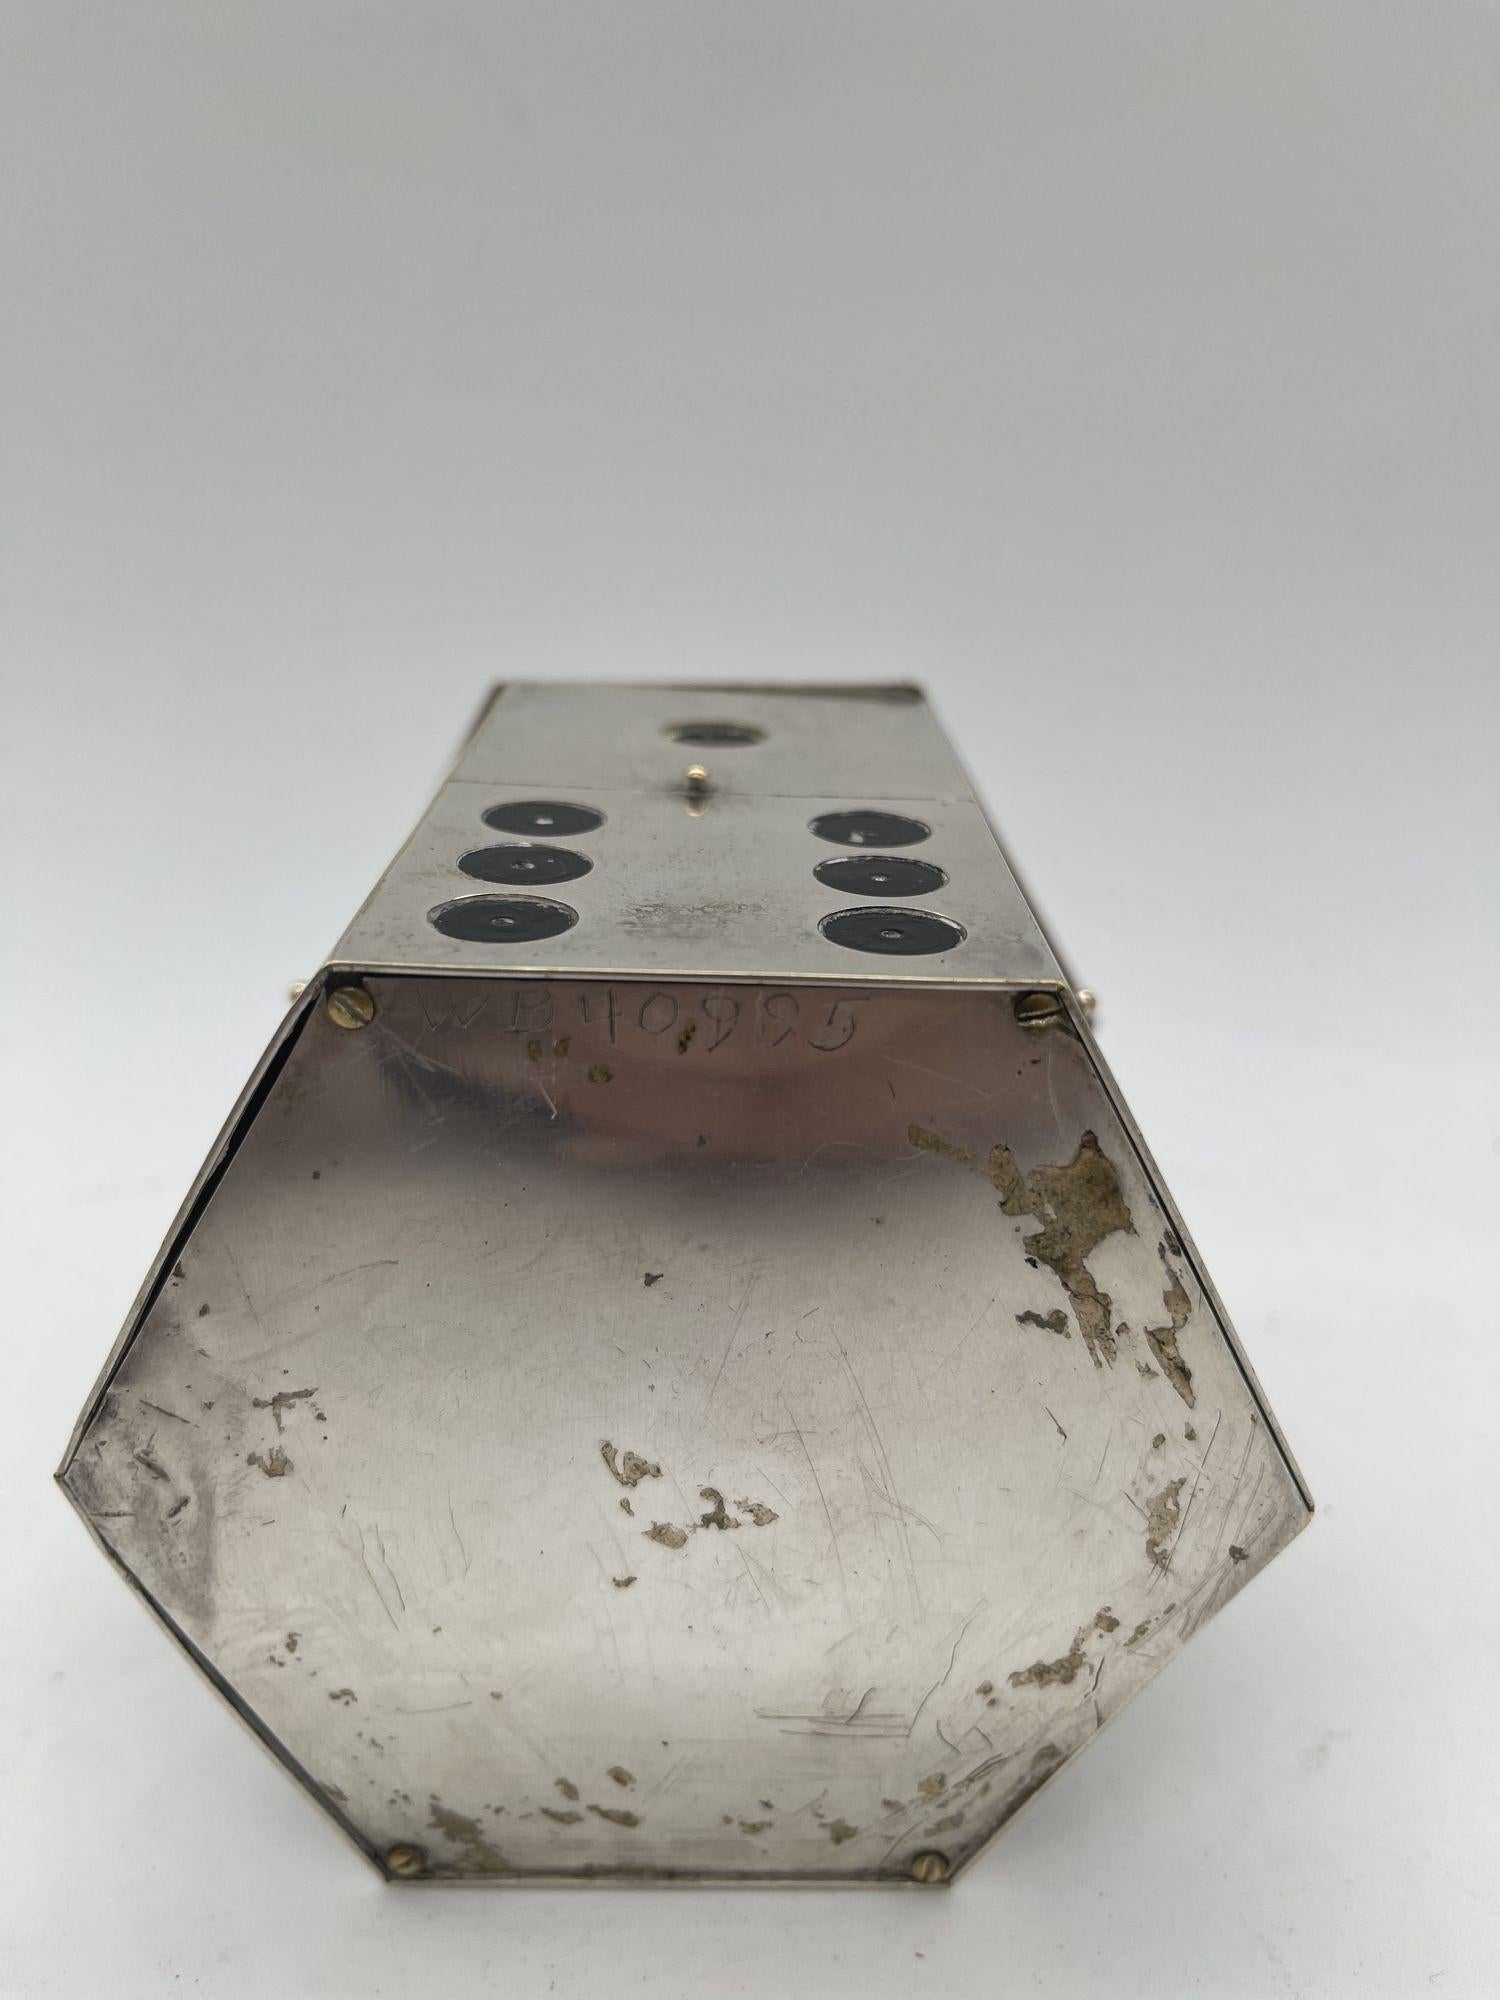 French Limited Jeweler Made Dice Cigarette Dispenser by Legros Marius for Dunhill For Sale